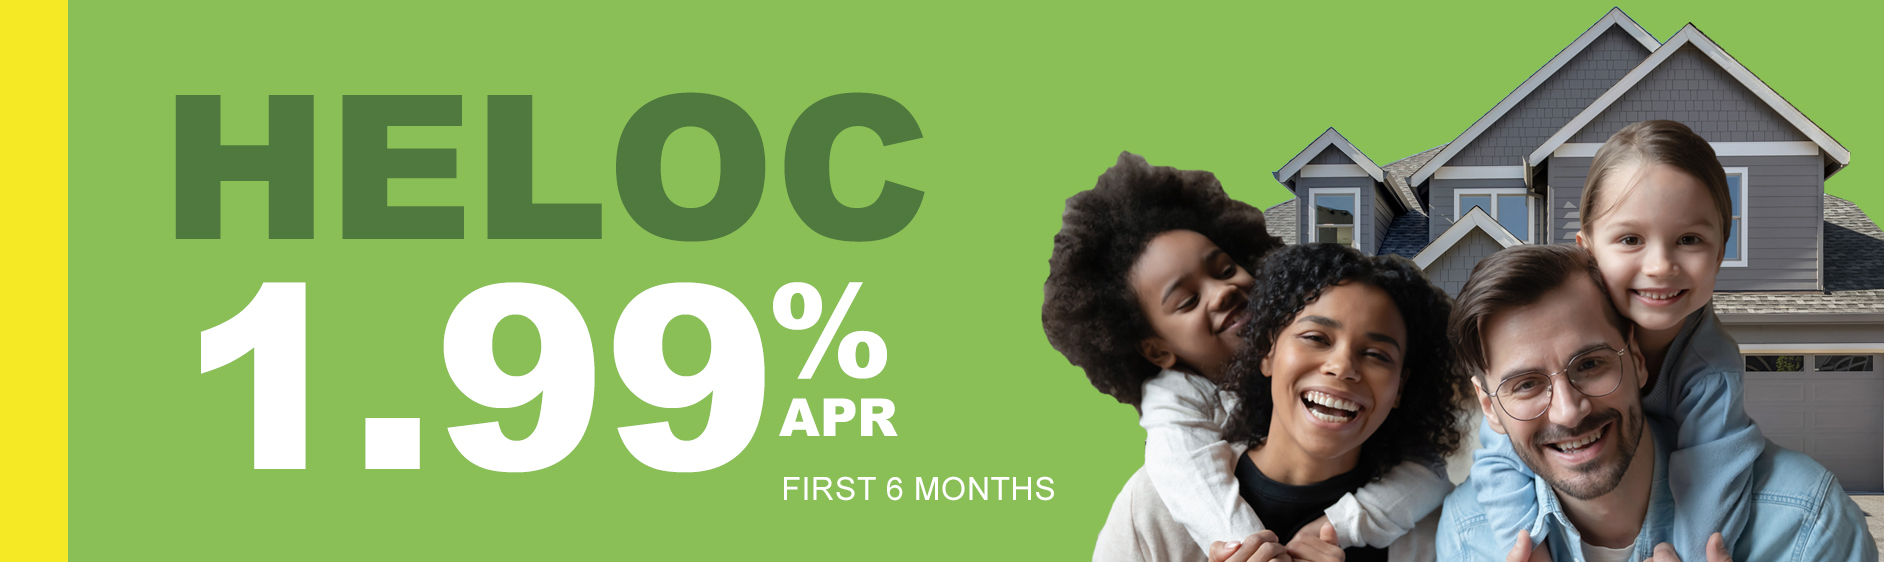 HOME EQUITY LINE OF CREDIT 1.99%APR* for the first 6 months